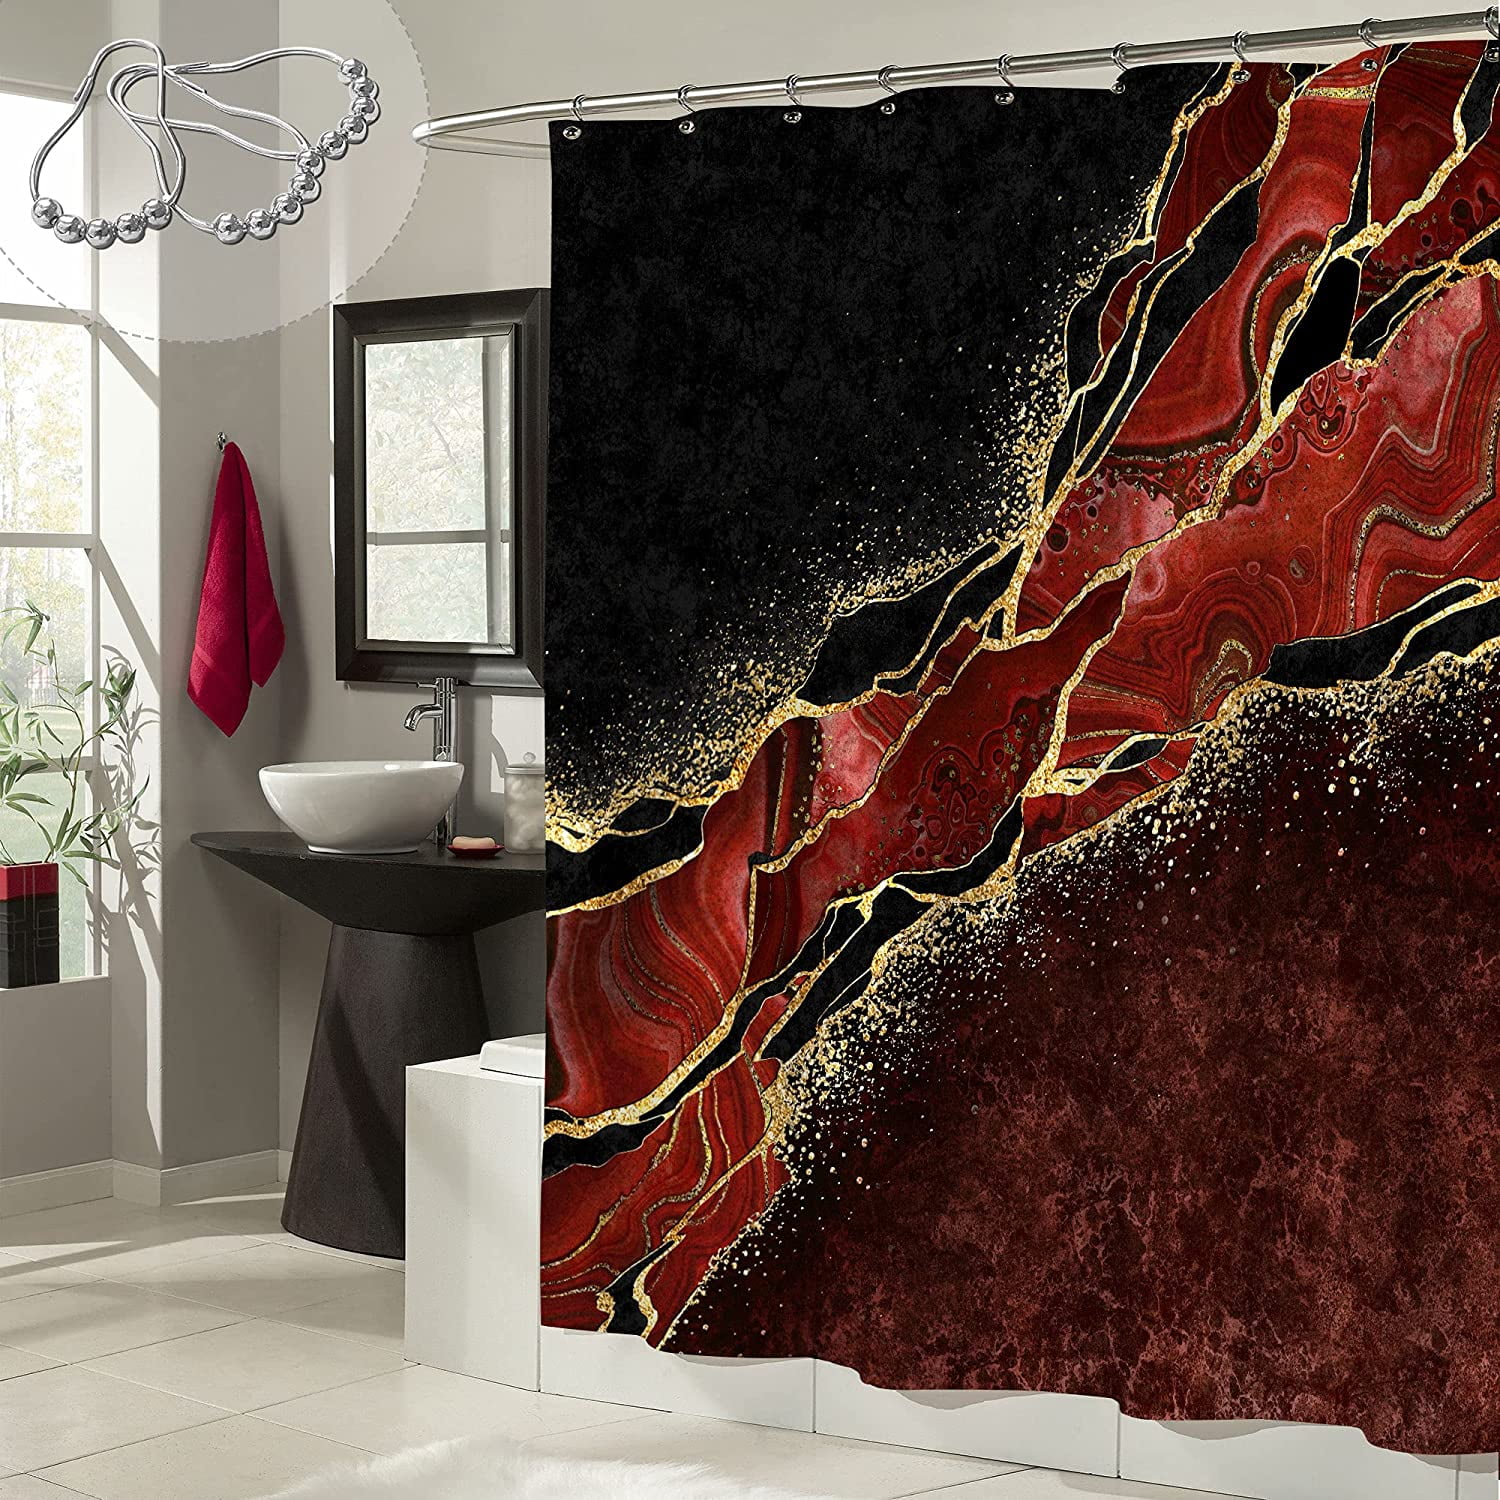 Abstract Red and Black Shower Curtain Liner Waterproof Fabric & Hooks Bathroom 